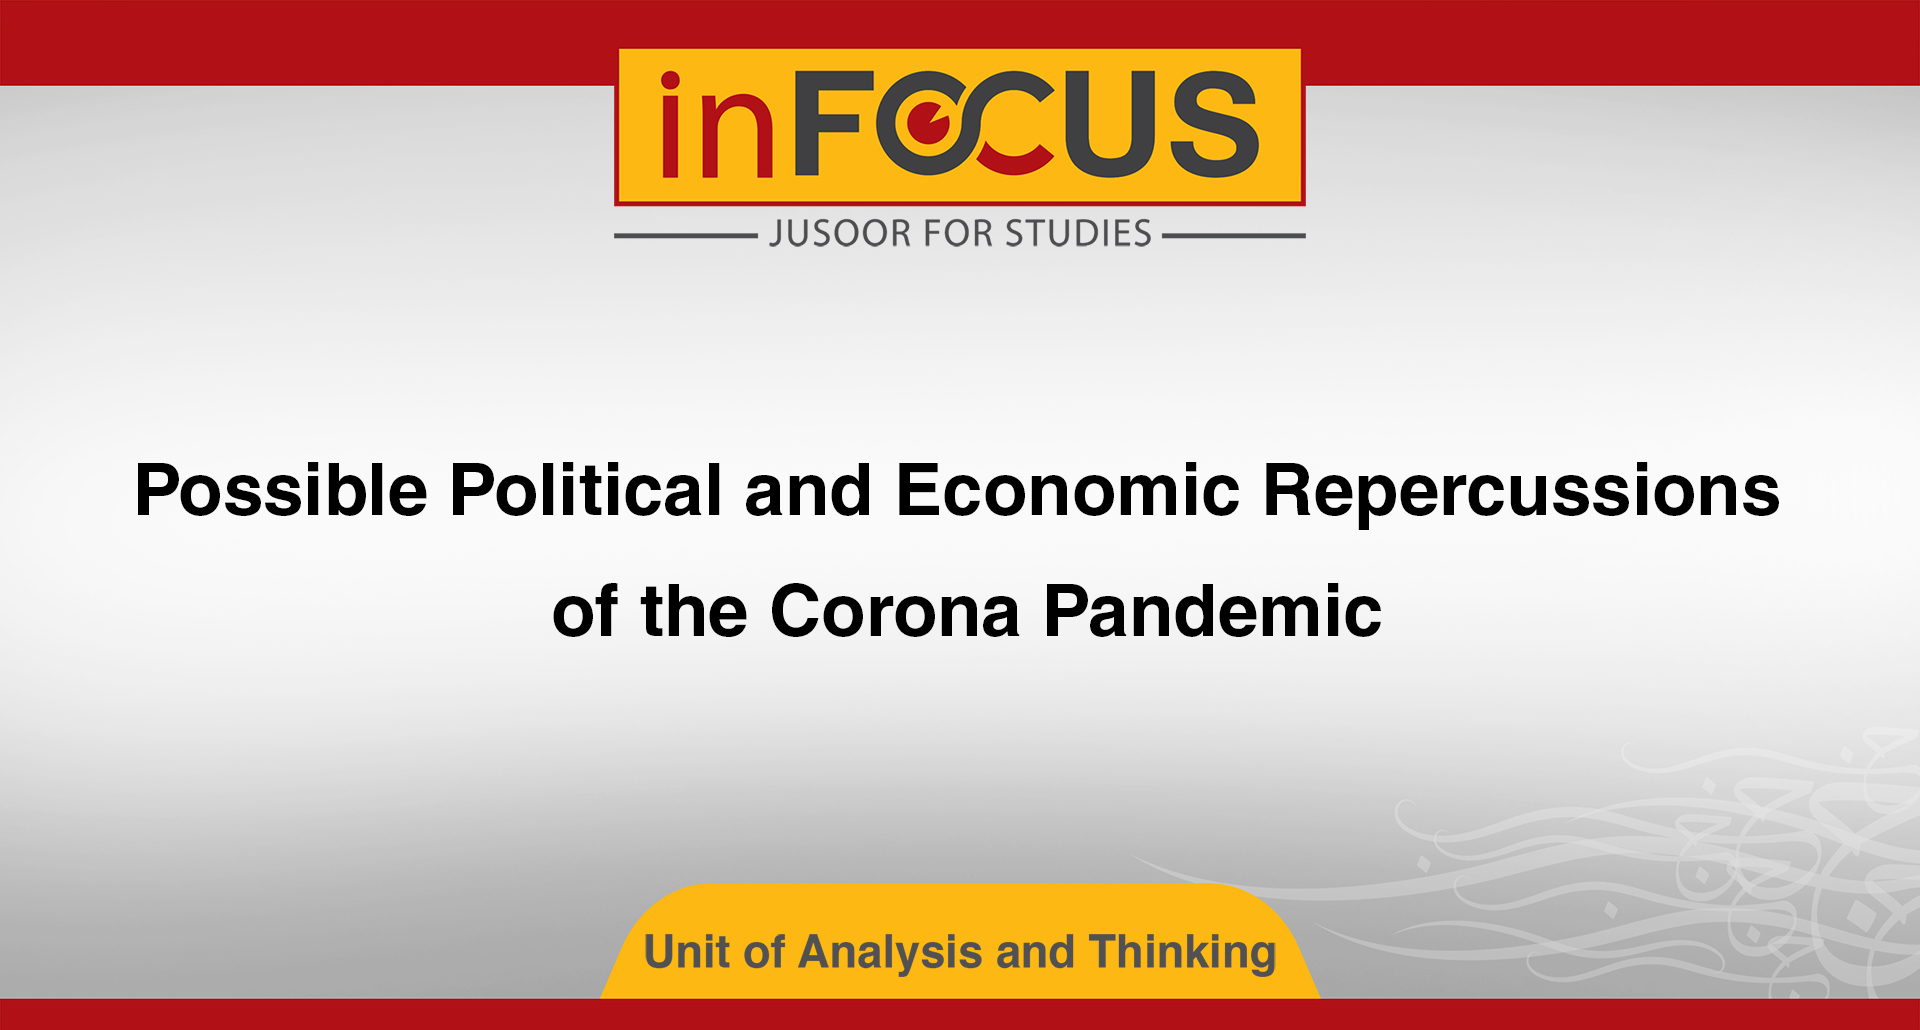 Possible Political and Economic Repercussions of the Corona Pandemic